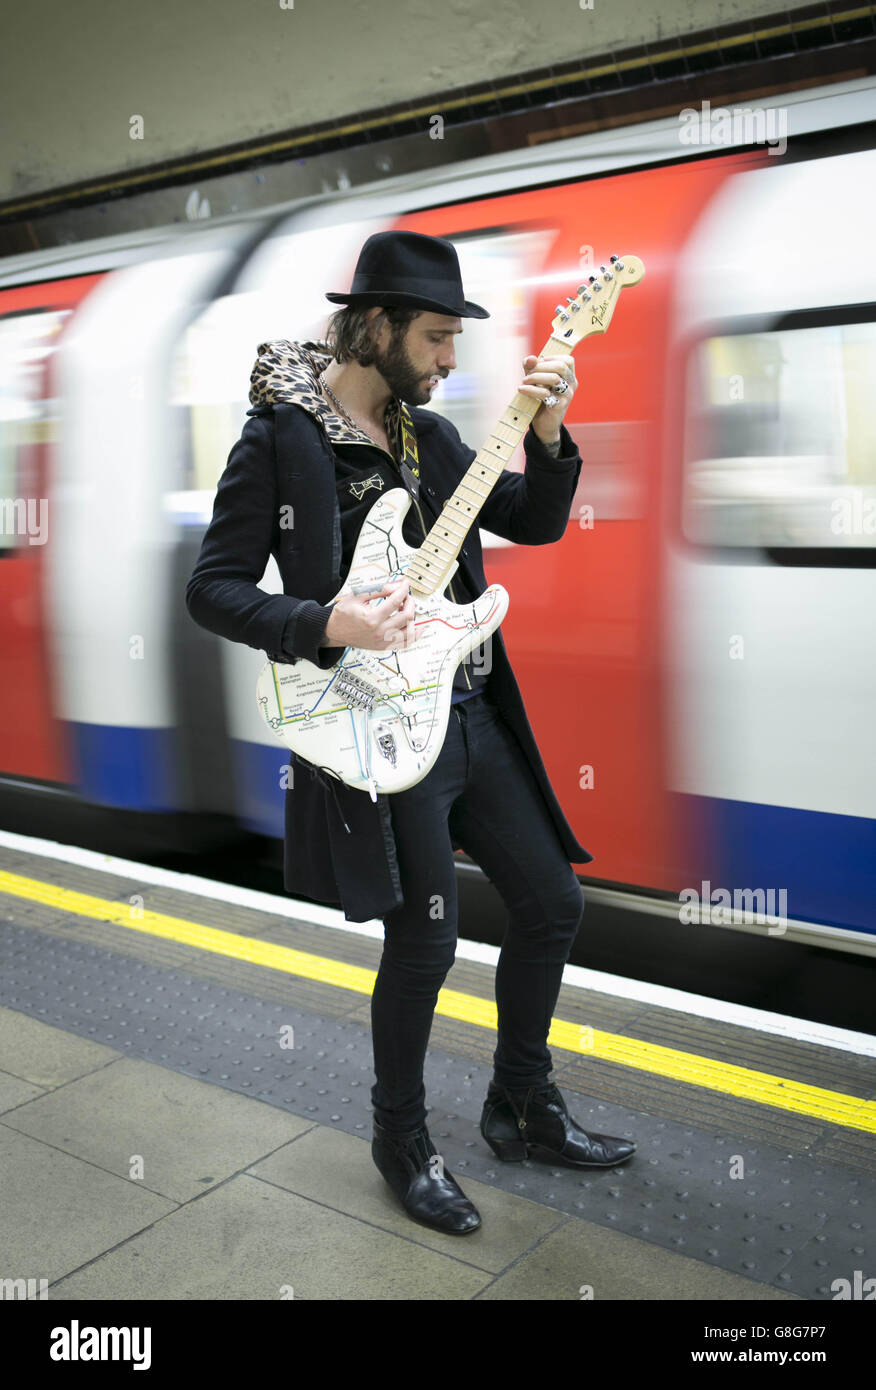 Musician James Black unveils a special edition Fender Stratocaster guitar illustrated with the London Underground map at St John's Wood Tube station, to celebrate Transport for London and the London Transport Museum's Transported by Design programme. Stock Photo